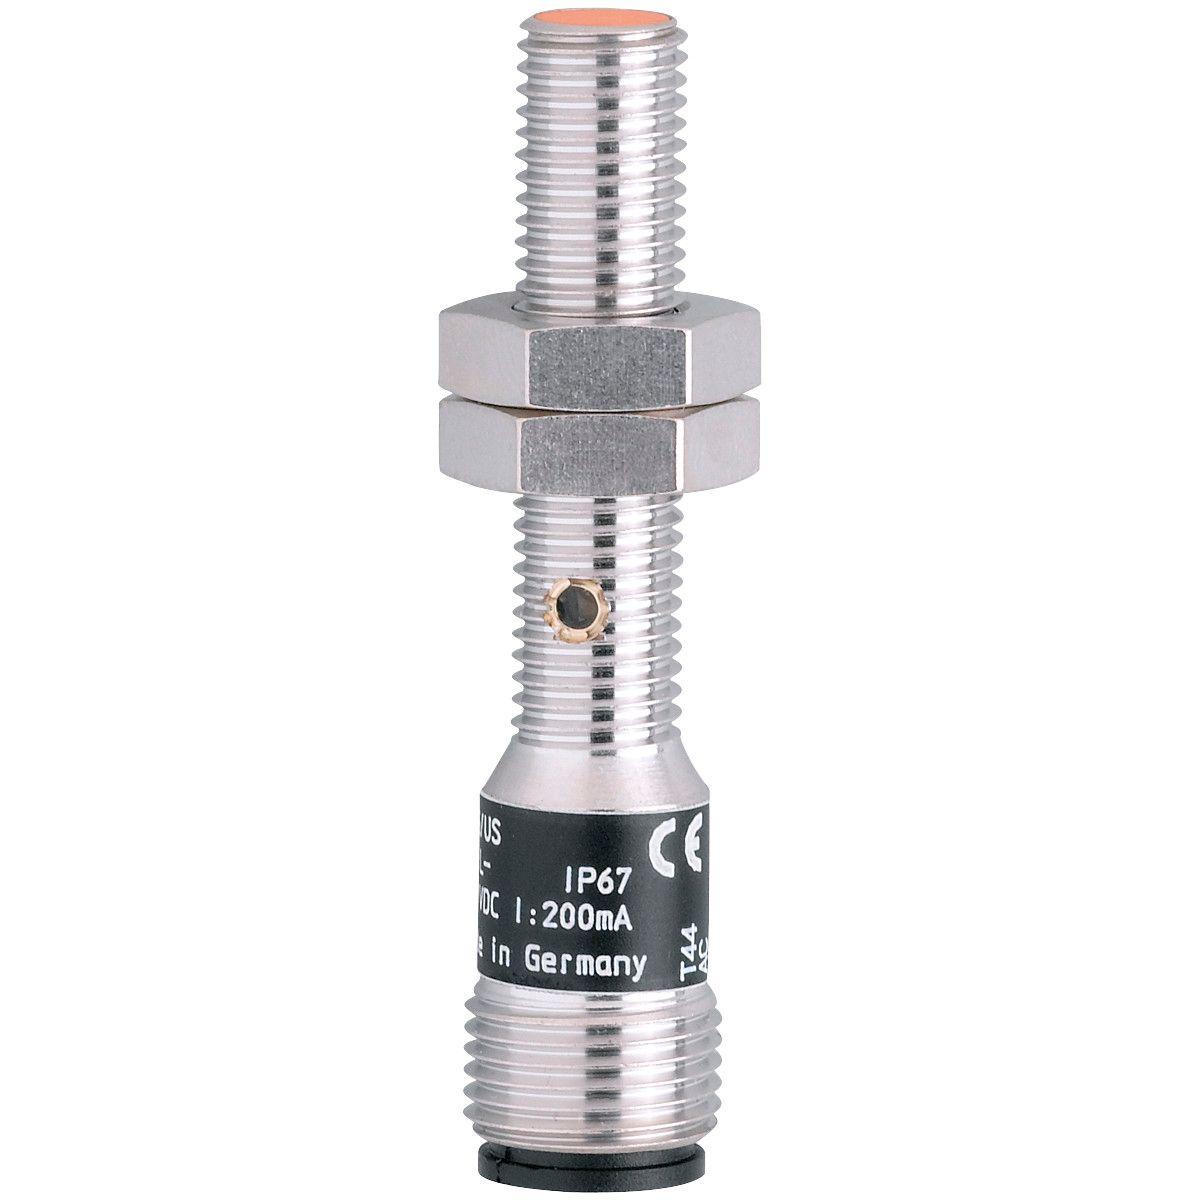 ifm Electronic IE5092 Inductive sensor, Space-saving design, Electrical design: NPN, Output function: normally open, Sensing range [mm]: 1, Housing: Threaded type, Dimensions [mm]: M8 x 1 / L = 53